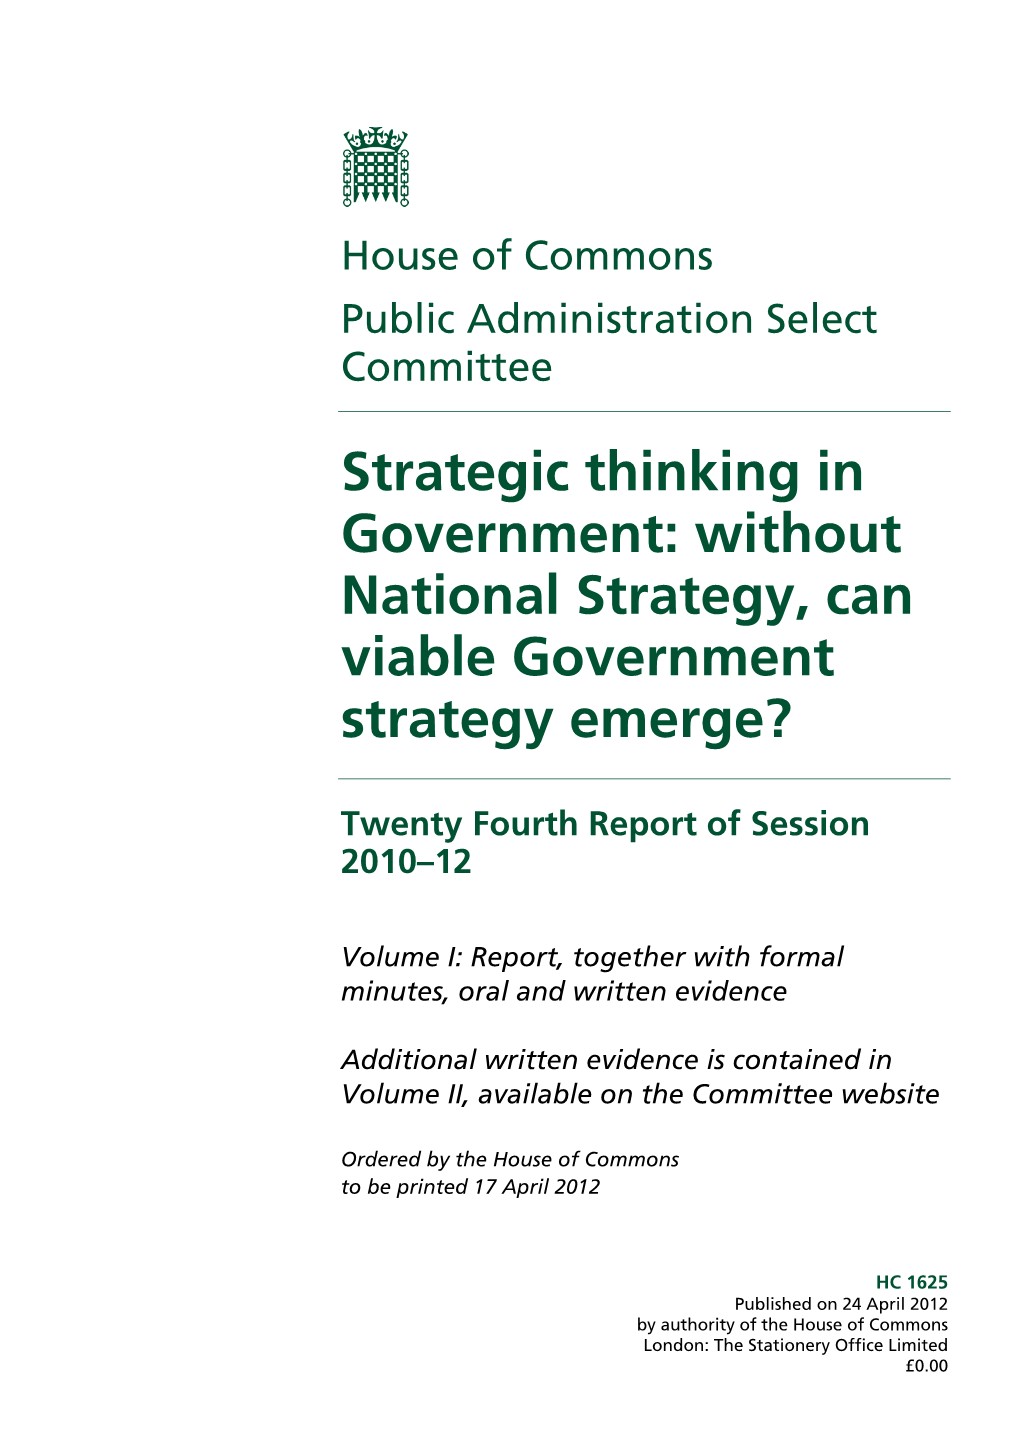 Strategic Thinking in Government: Without National Strategy, Can Viable Government Strategy Emerge?